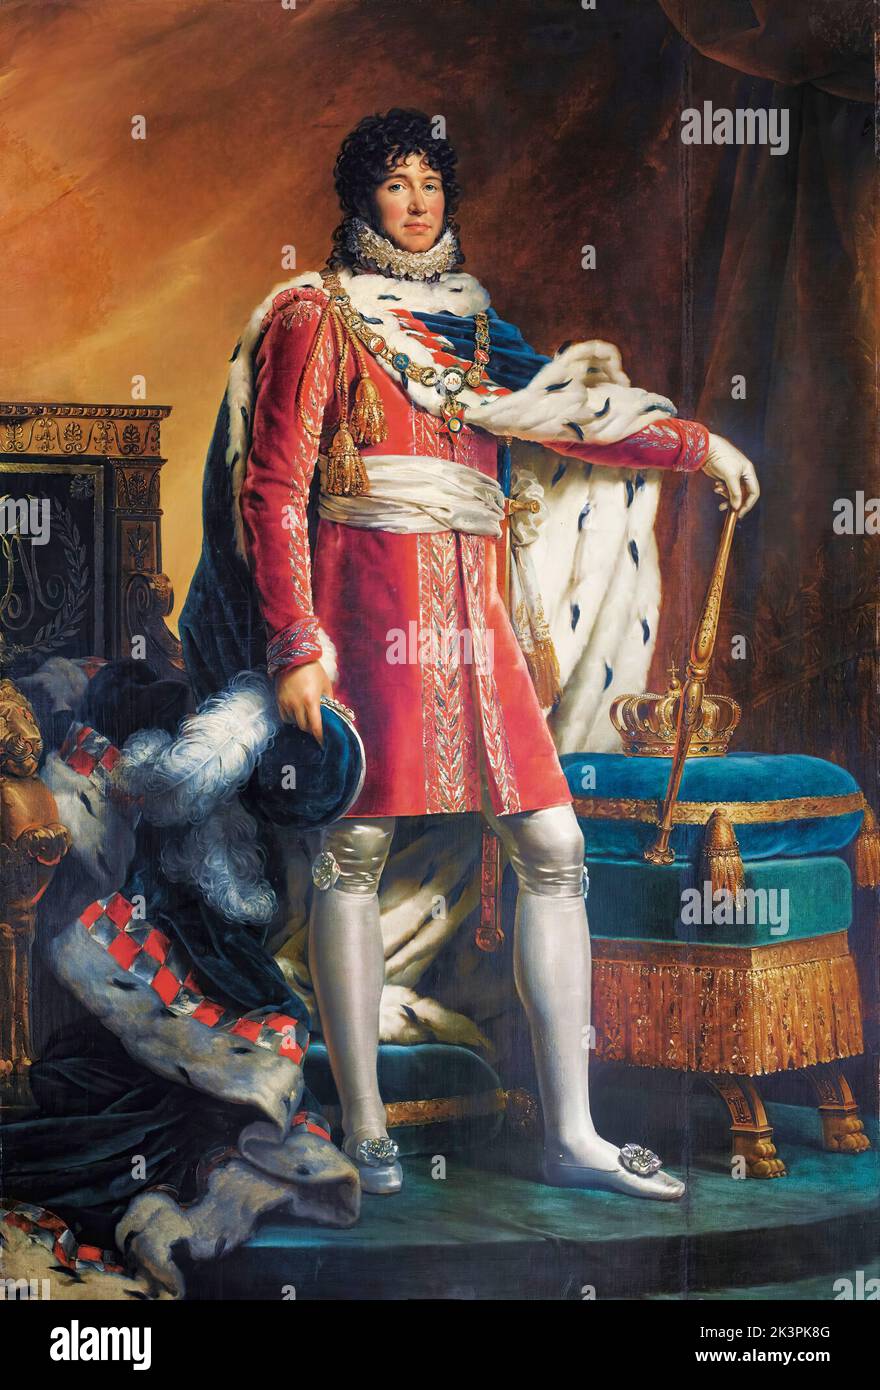 Joachim Napoléon Murat (1767-1815), King of Naples and of the two Sicilies (1808-1815), portrait painting in oil on canvas by François Gérard, 1811-1812 Stock Photo